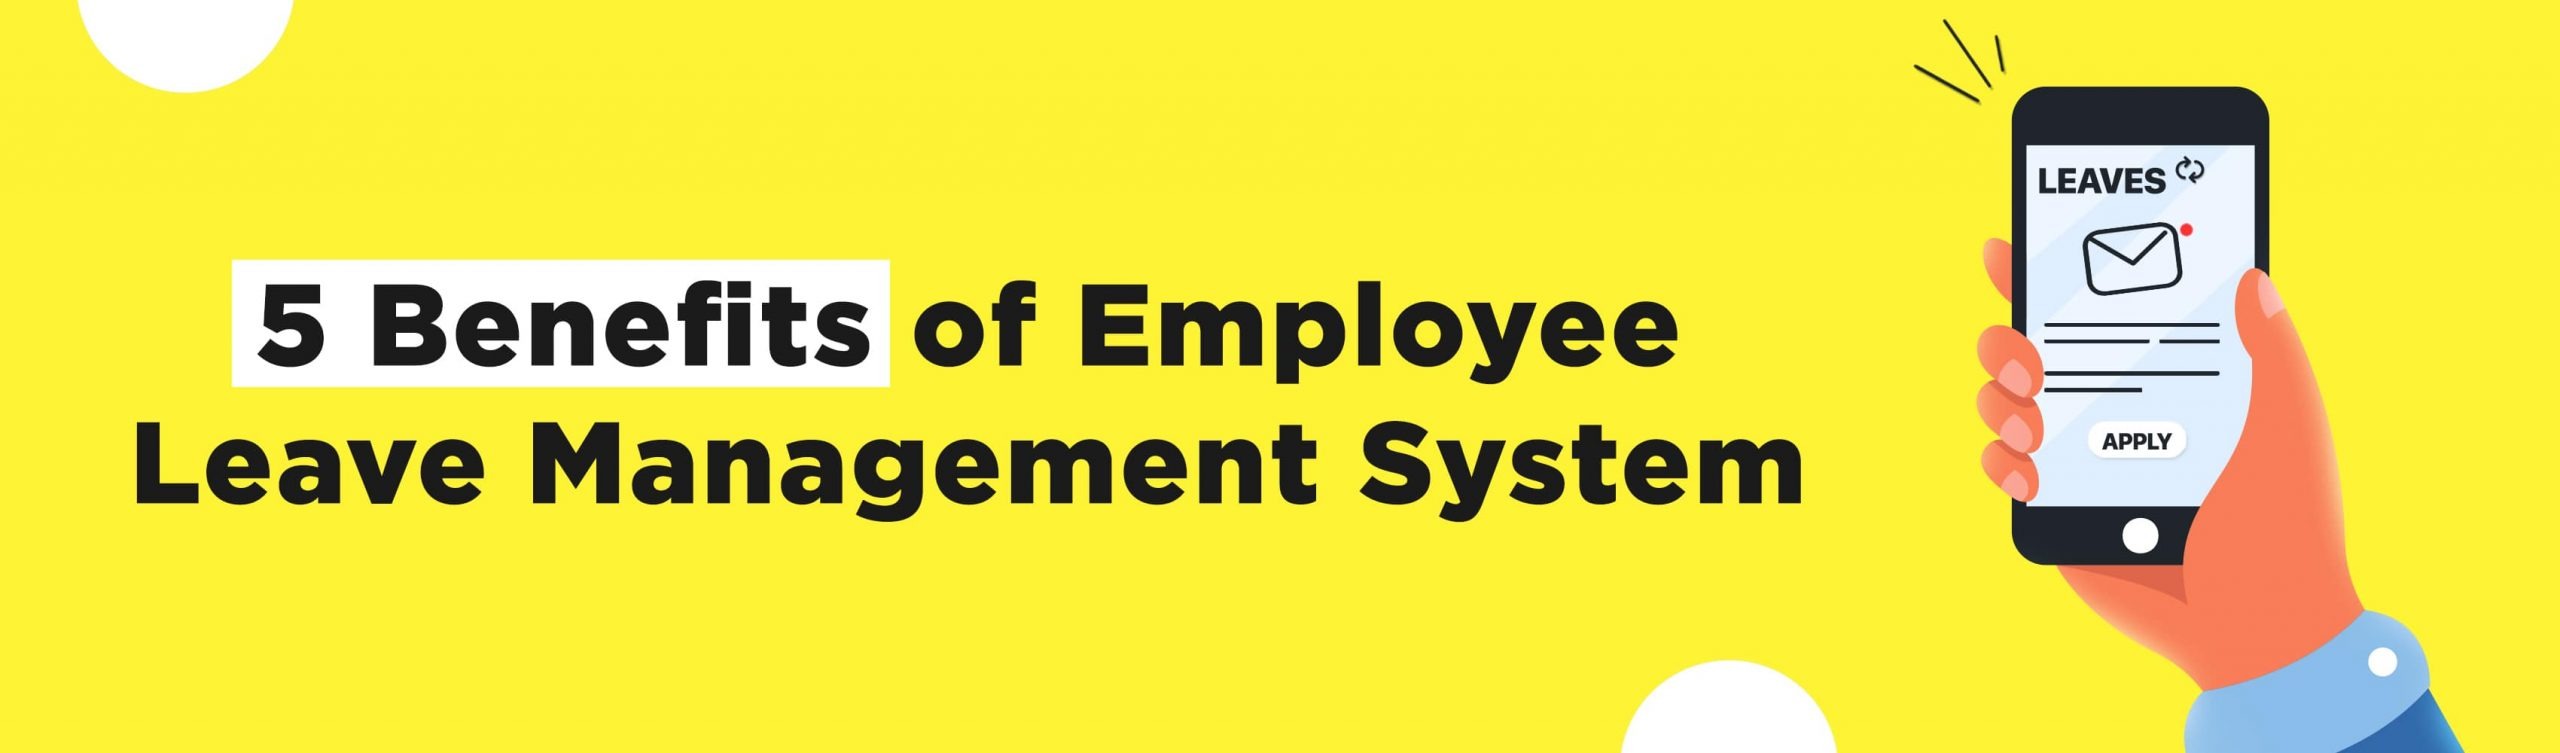 6 Benefits of Having An Automated Leave Management System At Your Organization